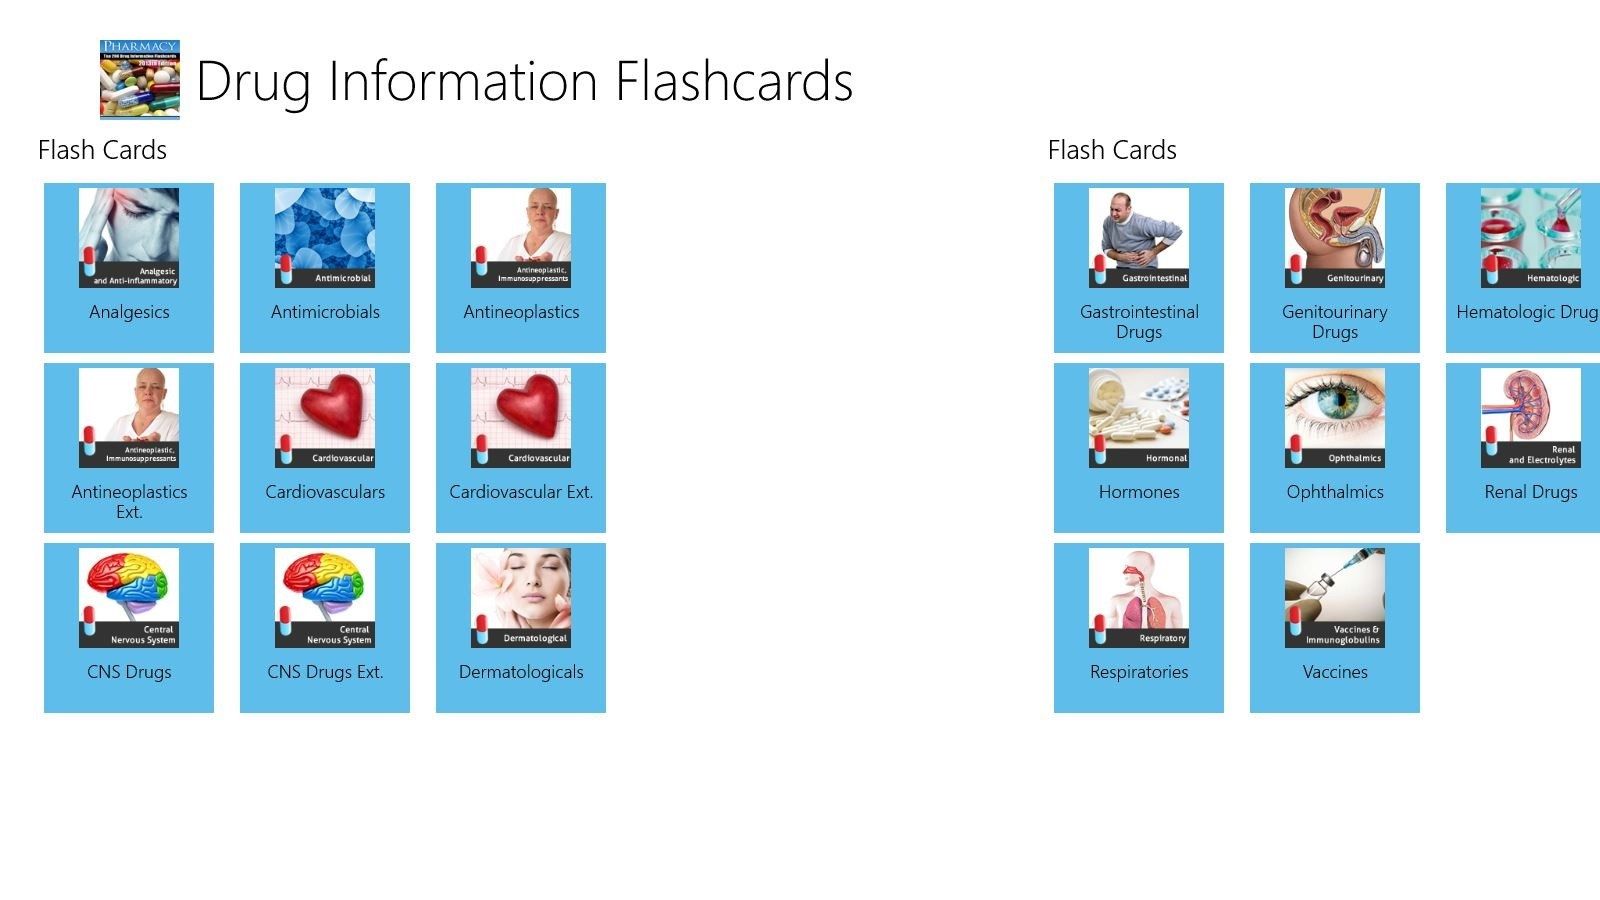 Menu sections of the flash cards